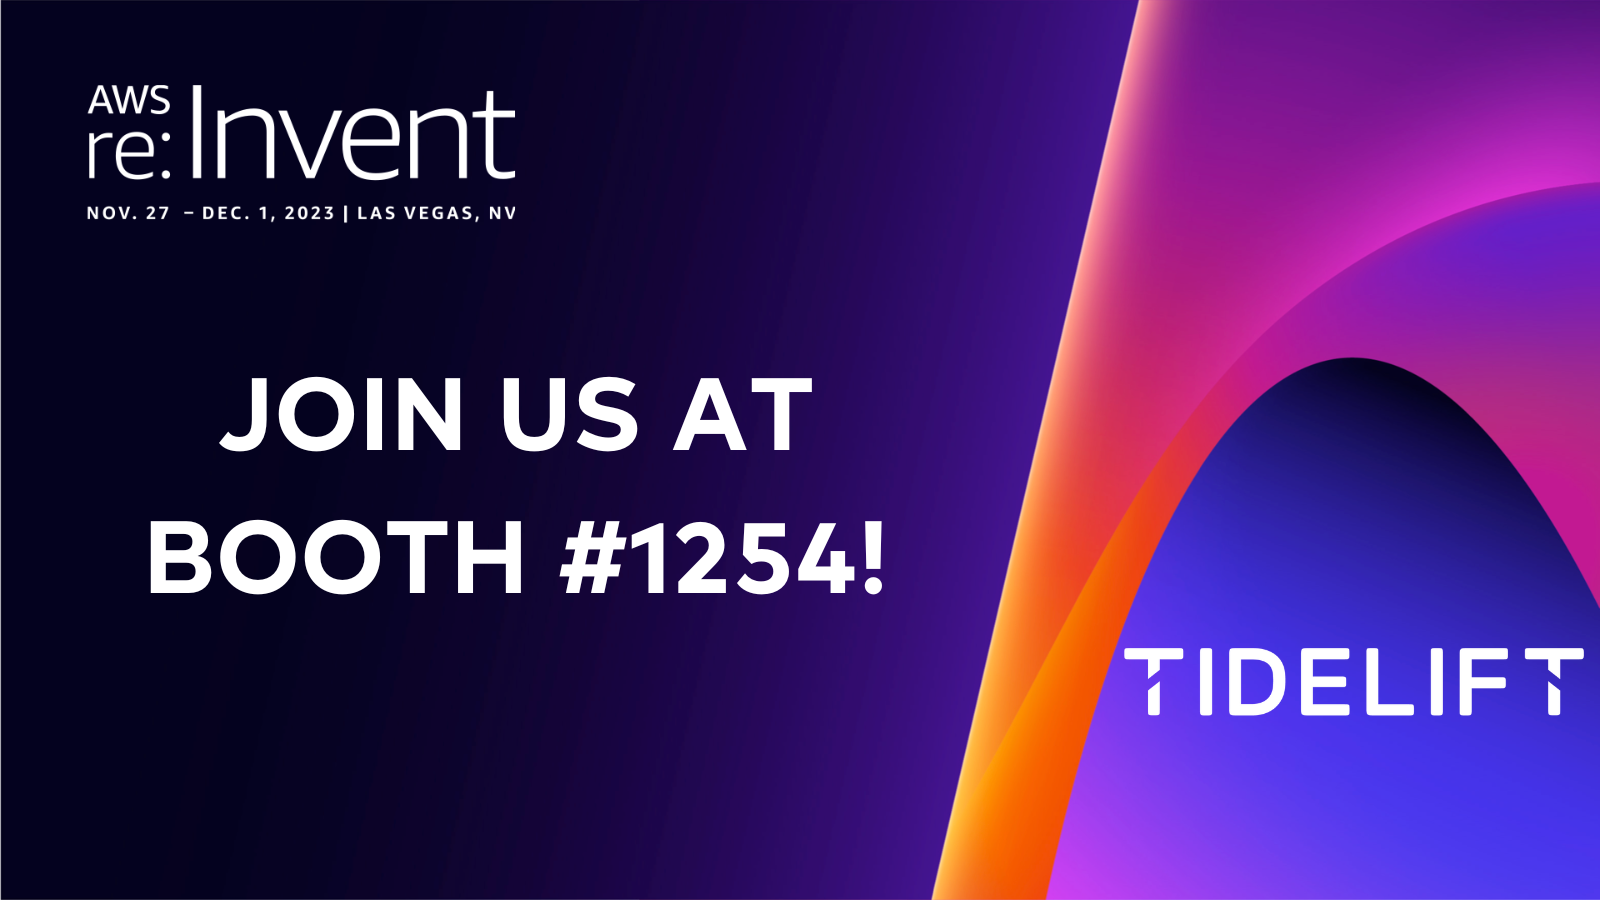 Tidelift at AWS re:Invent 2023